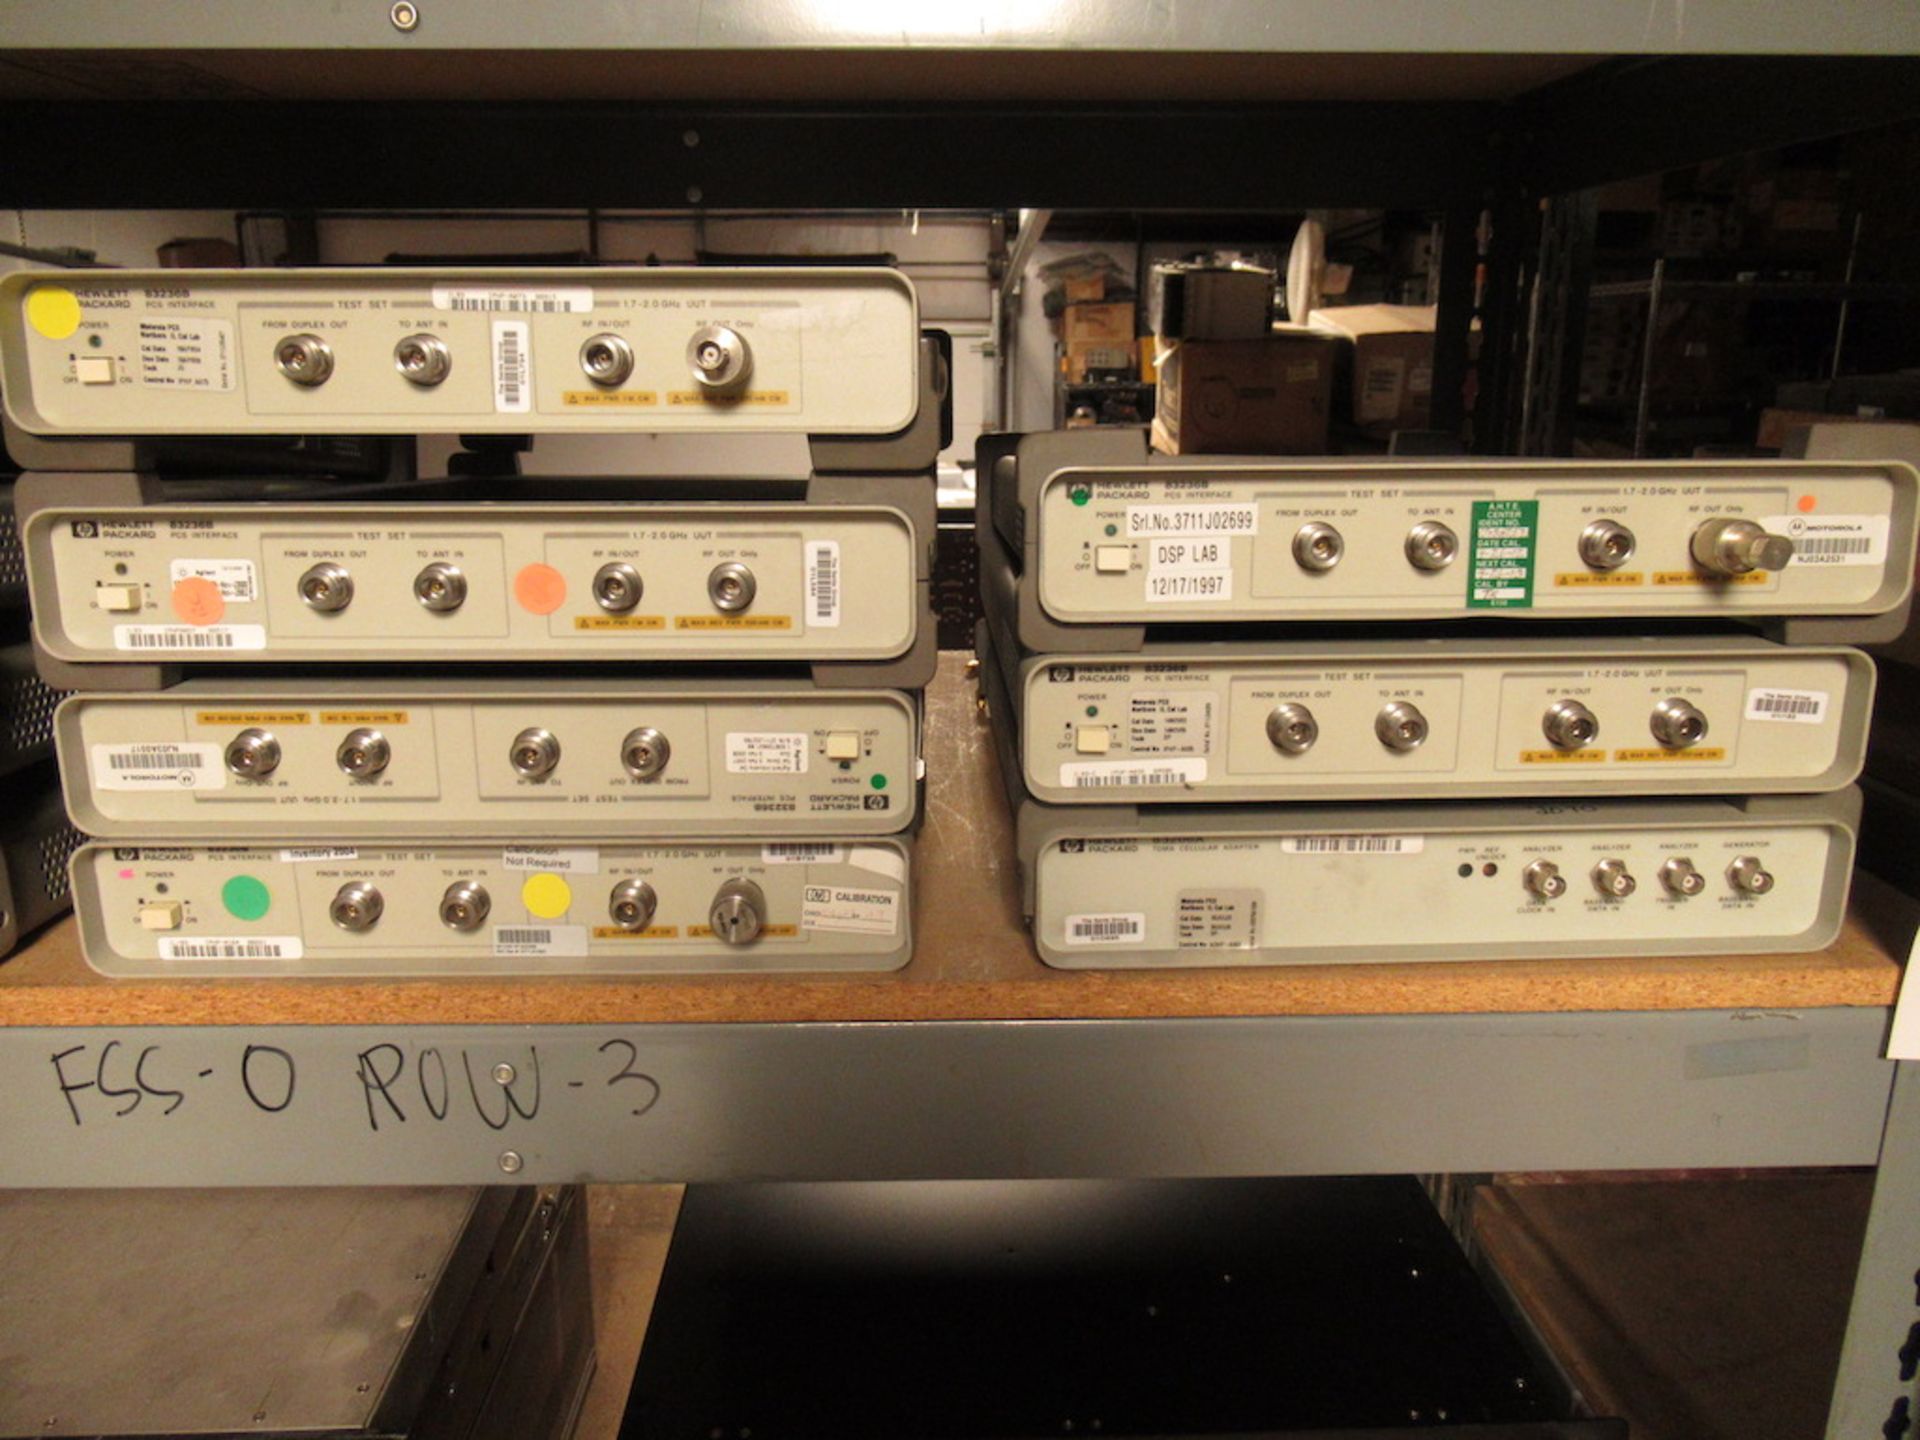 Lot to include entire rack: (22) HP 83236B PCS Interface , (1)v HP 83206A TDMA Cellular Adapter, - Image 6 of 23